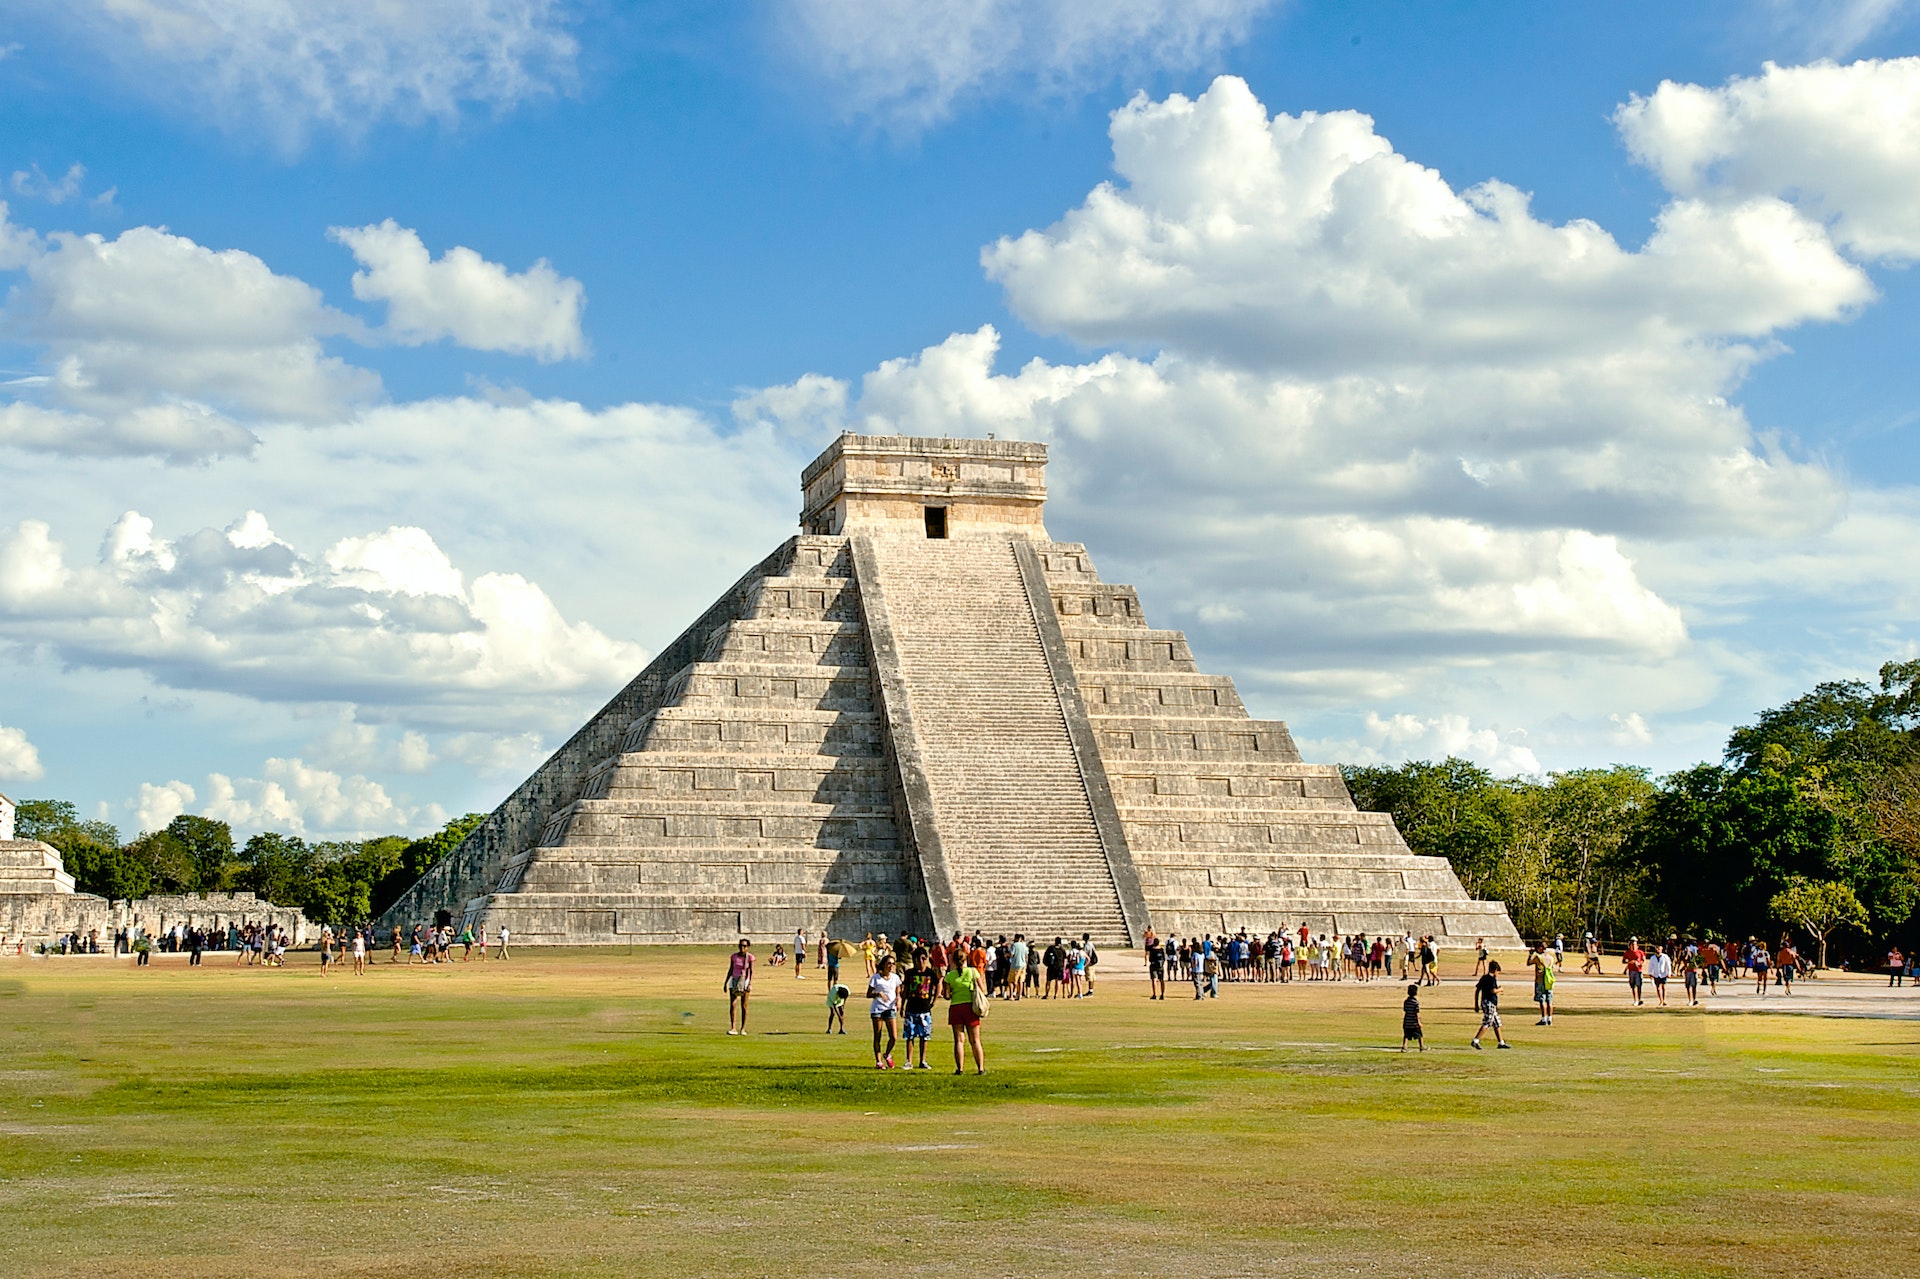 Maya ruin of the Temple of Kukulcan at Chichén Itzá, Mexico, a stone pyramid with a square top